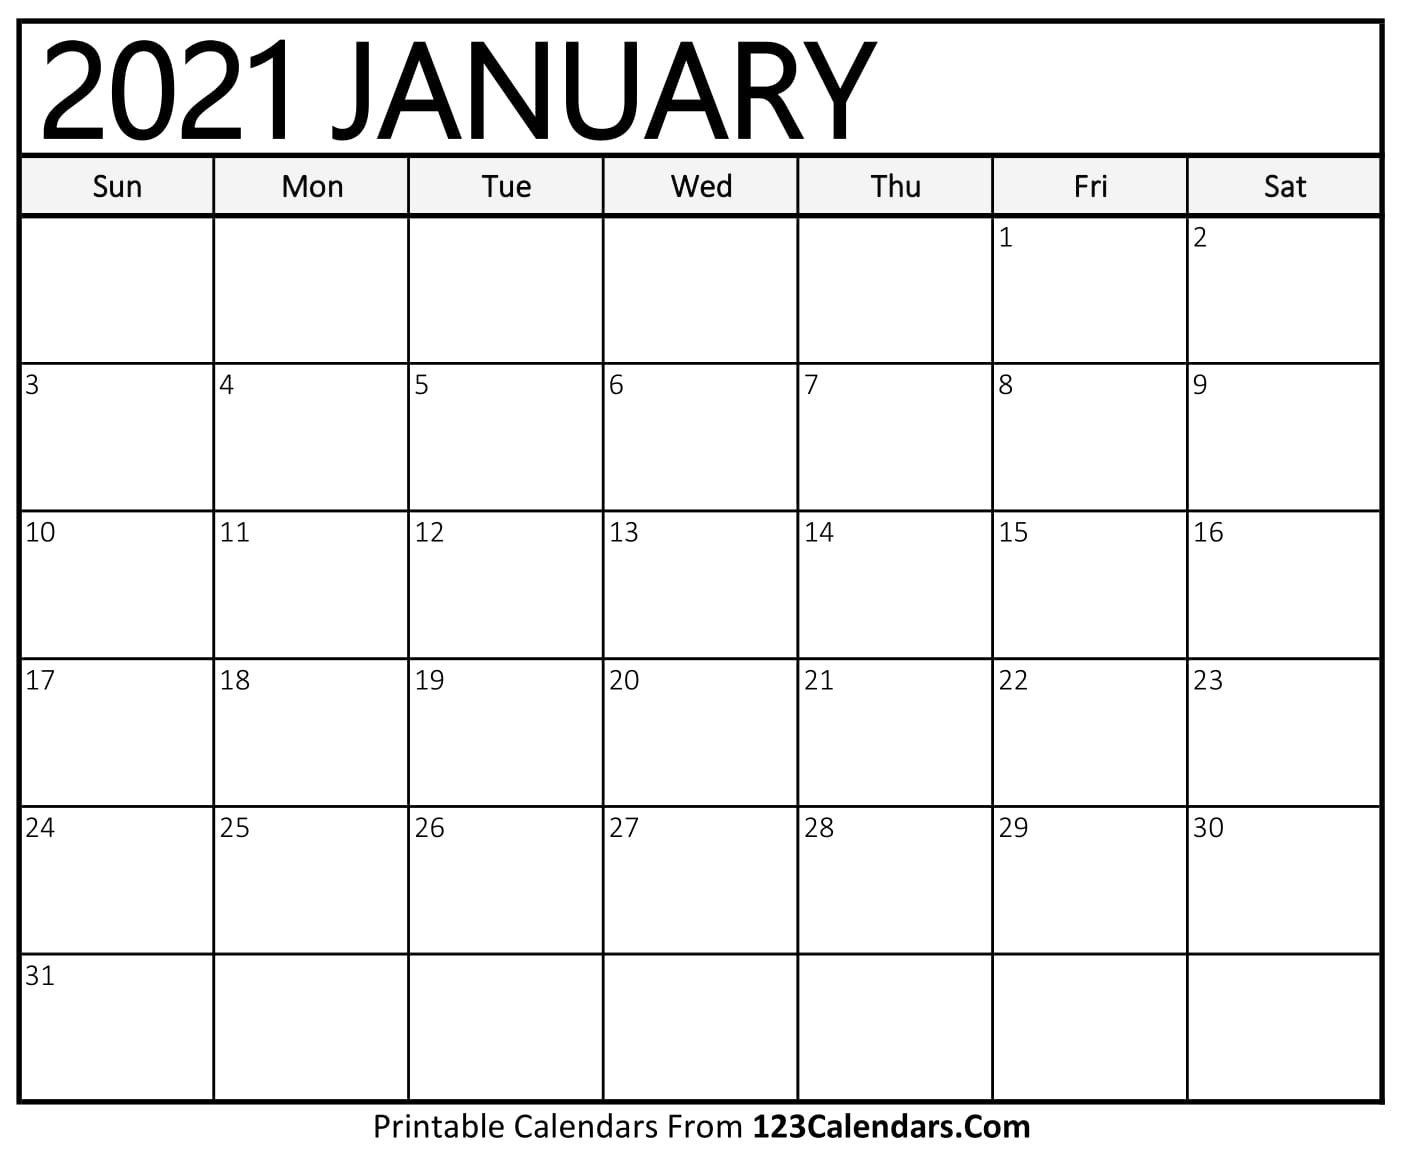 Pick Print Free 2021 Calendar Without Downloading Monthly